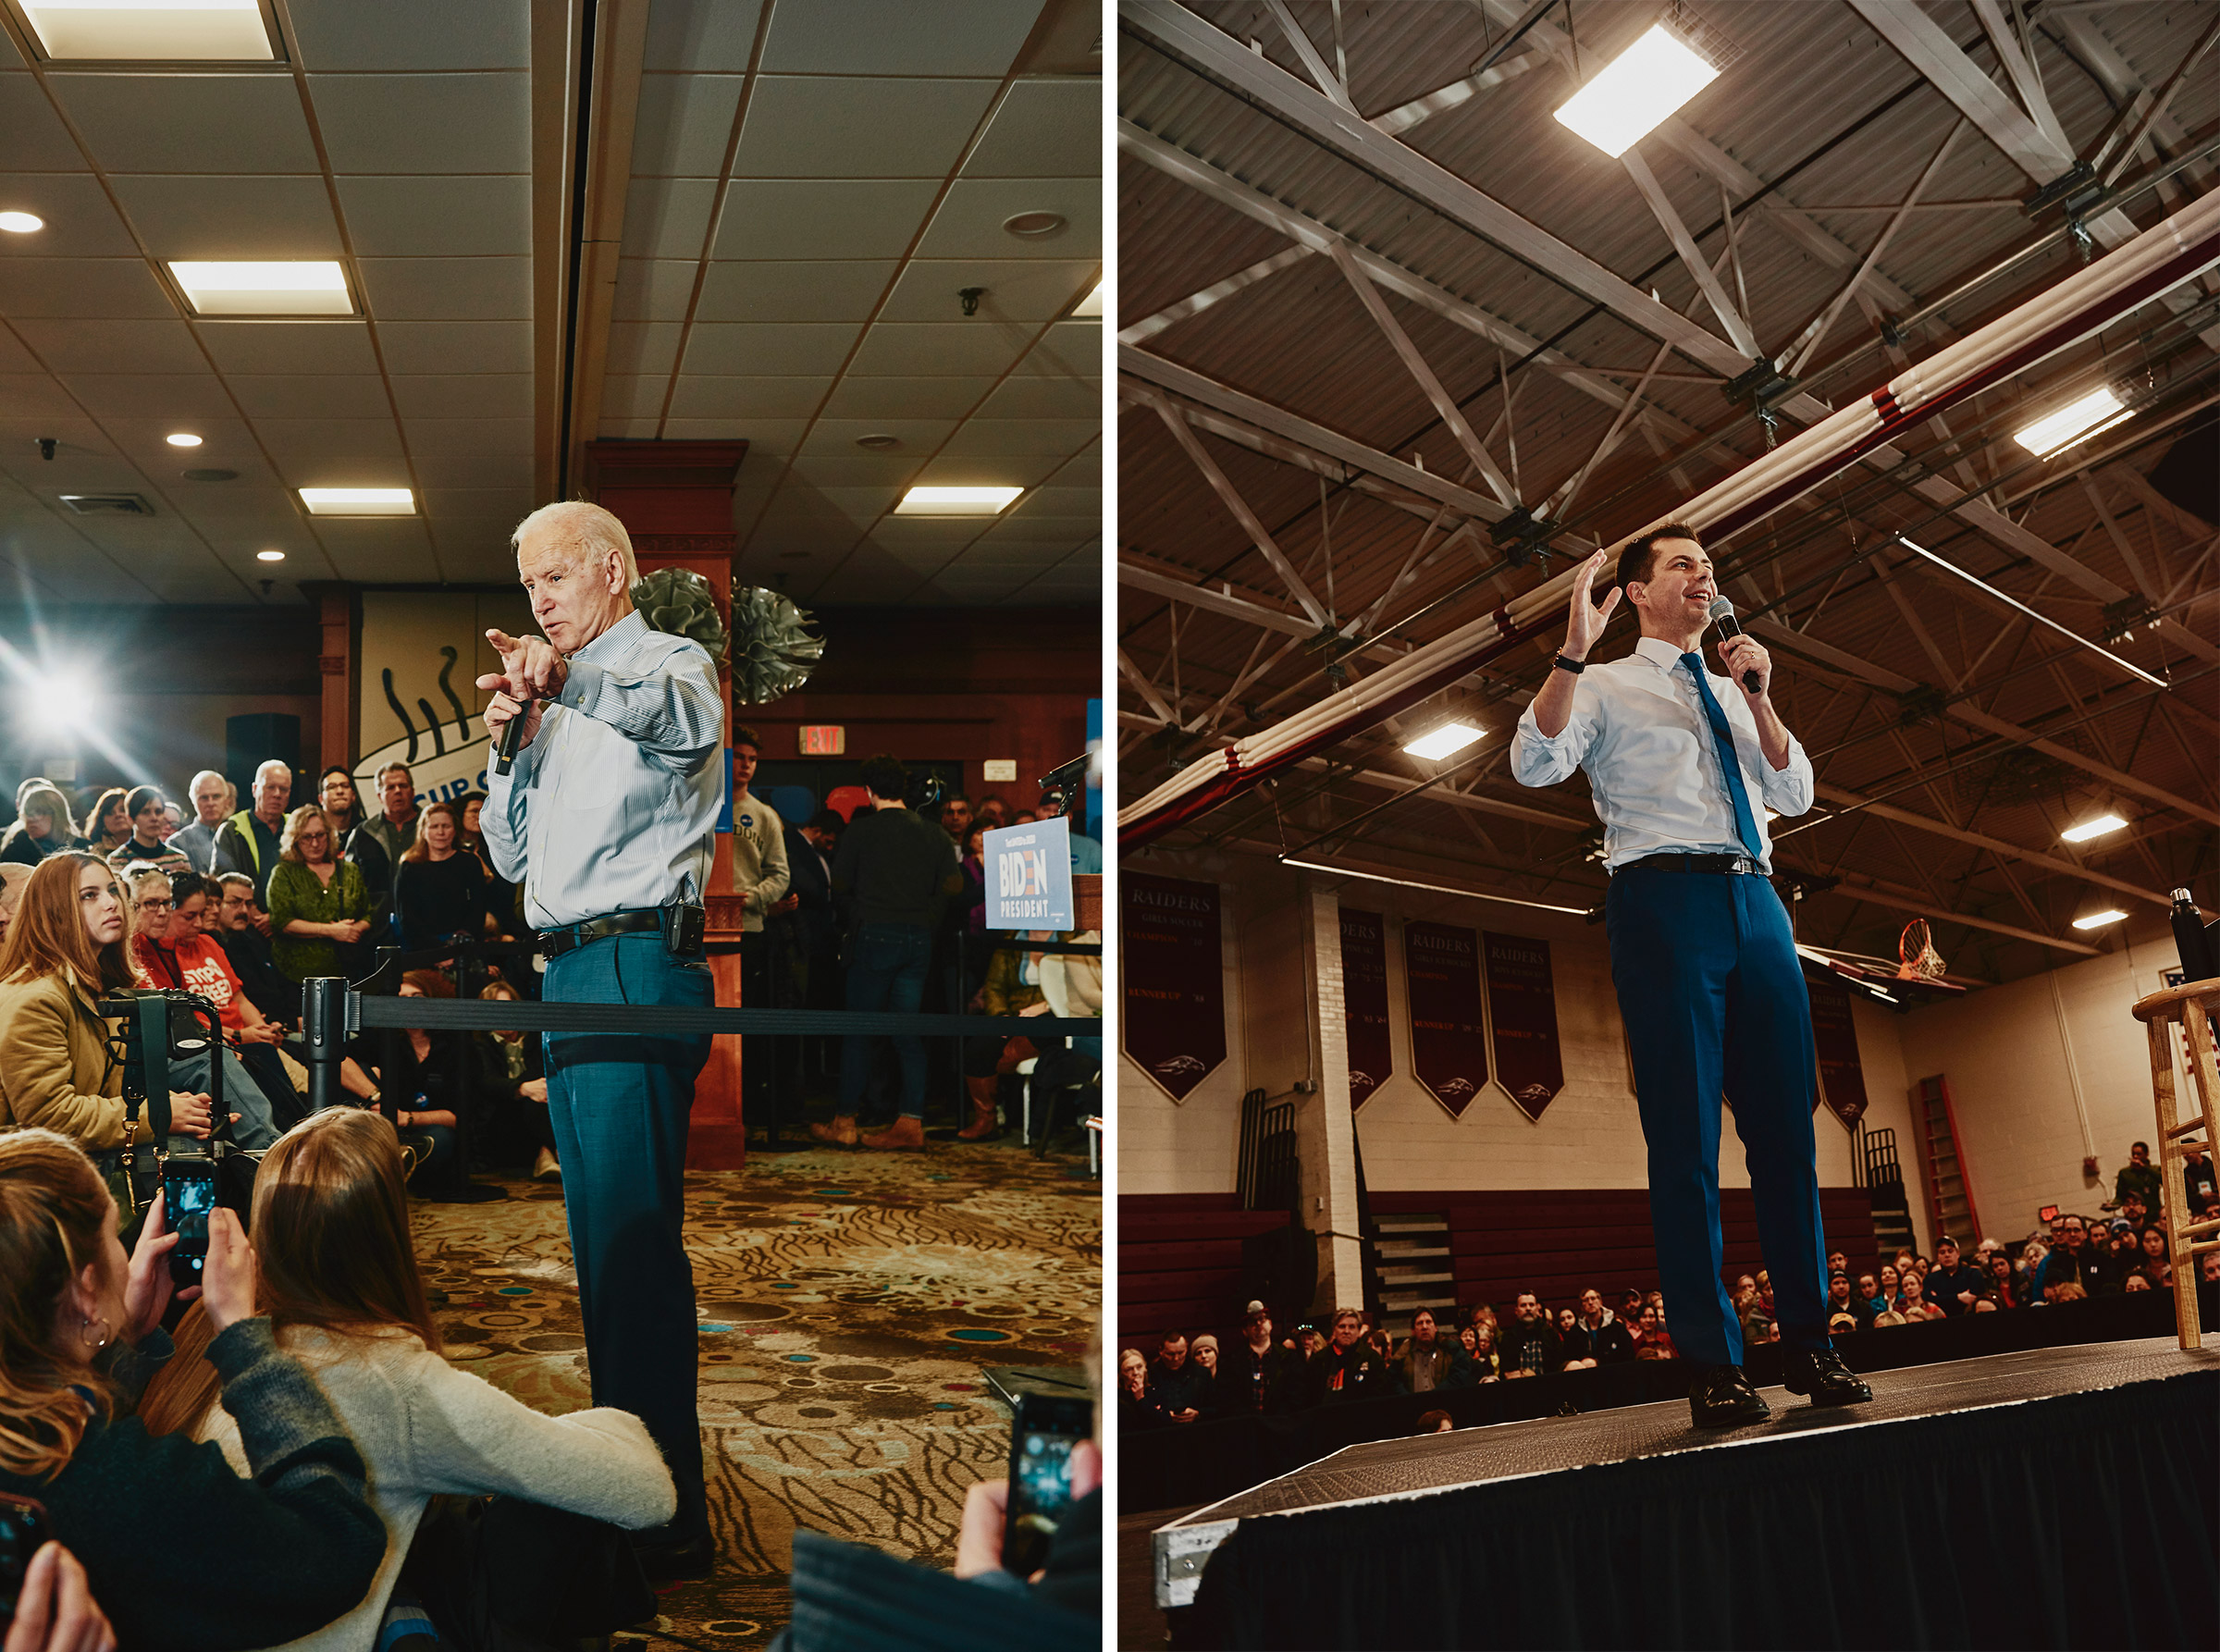 Former Vice President Joe Biden speaking at his GOTV Event at Ashworth by the Sea in Hampton, N.H. on Feb. 9, 2020; Pete Buttigieg speaks at a GOTV Rally at the Lebanon High School in Lebanon, N.H. on Feb. 8, 2020. (Tony Luong for TIME)